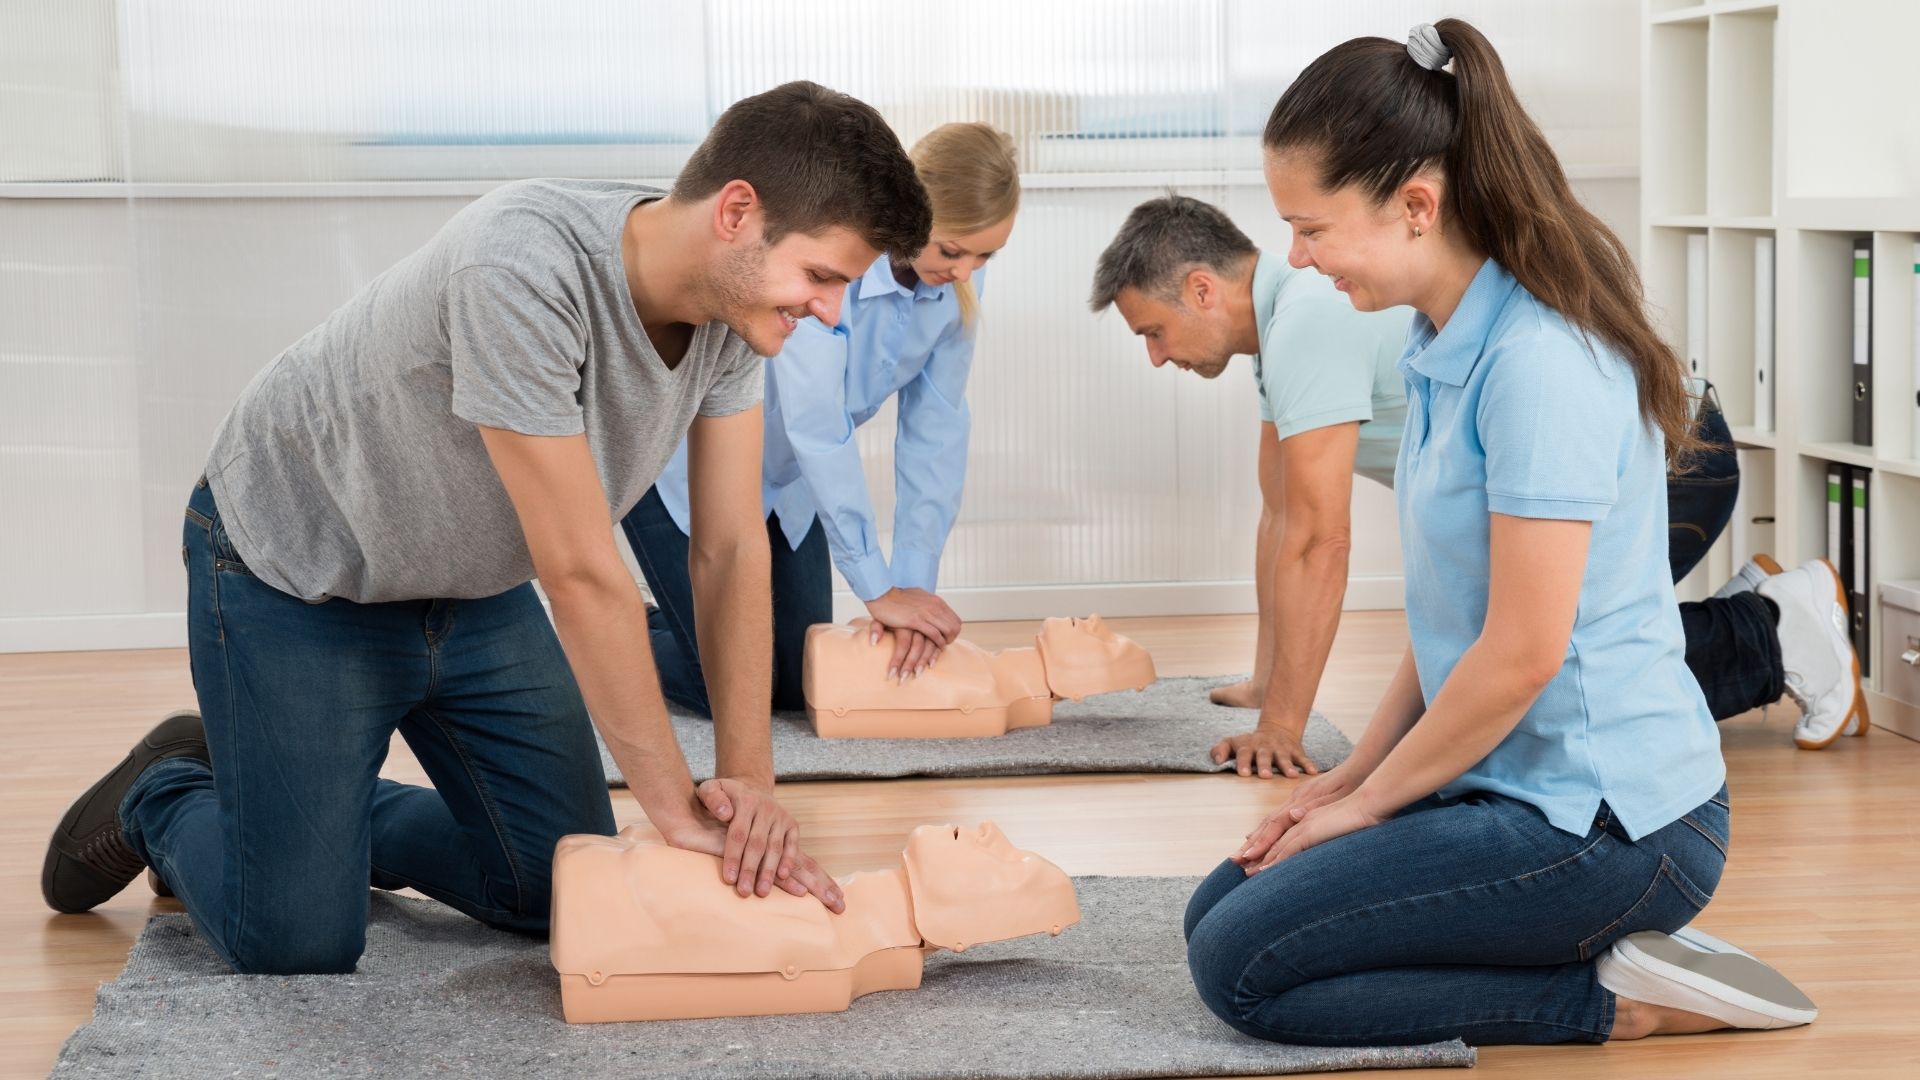 How to Get Healthcare Provider CPR Certification